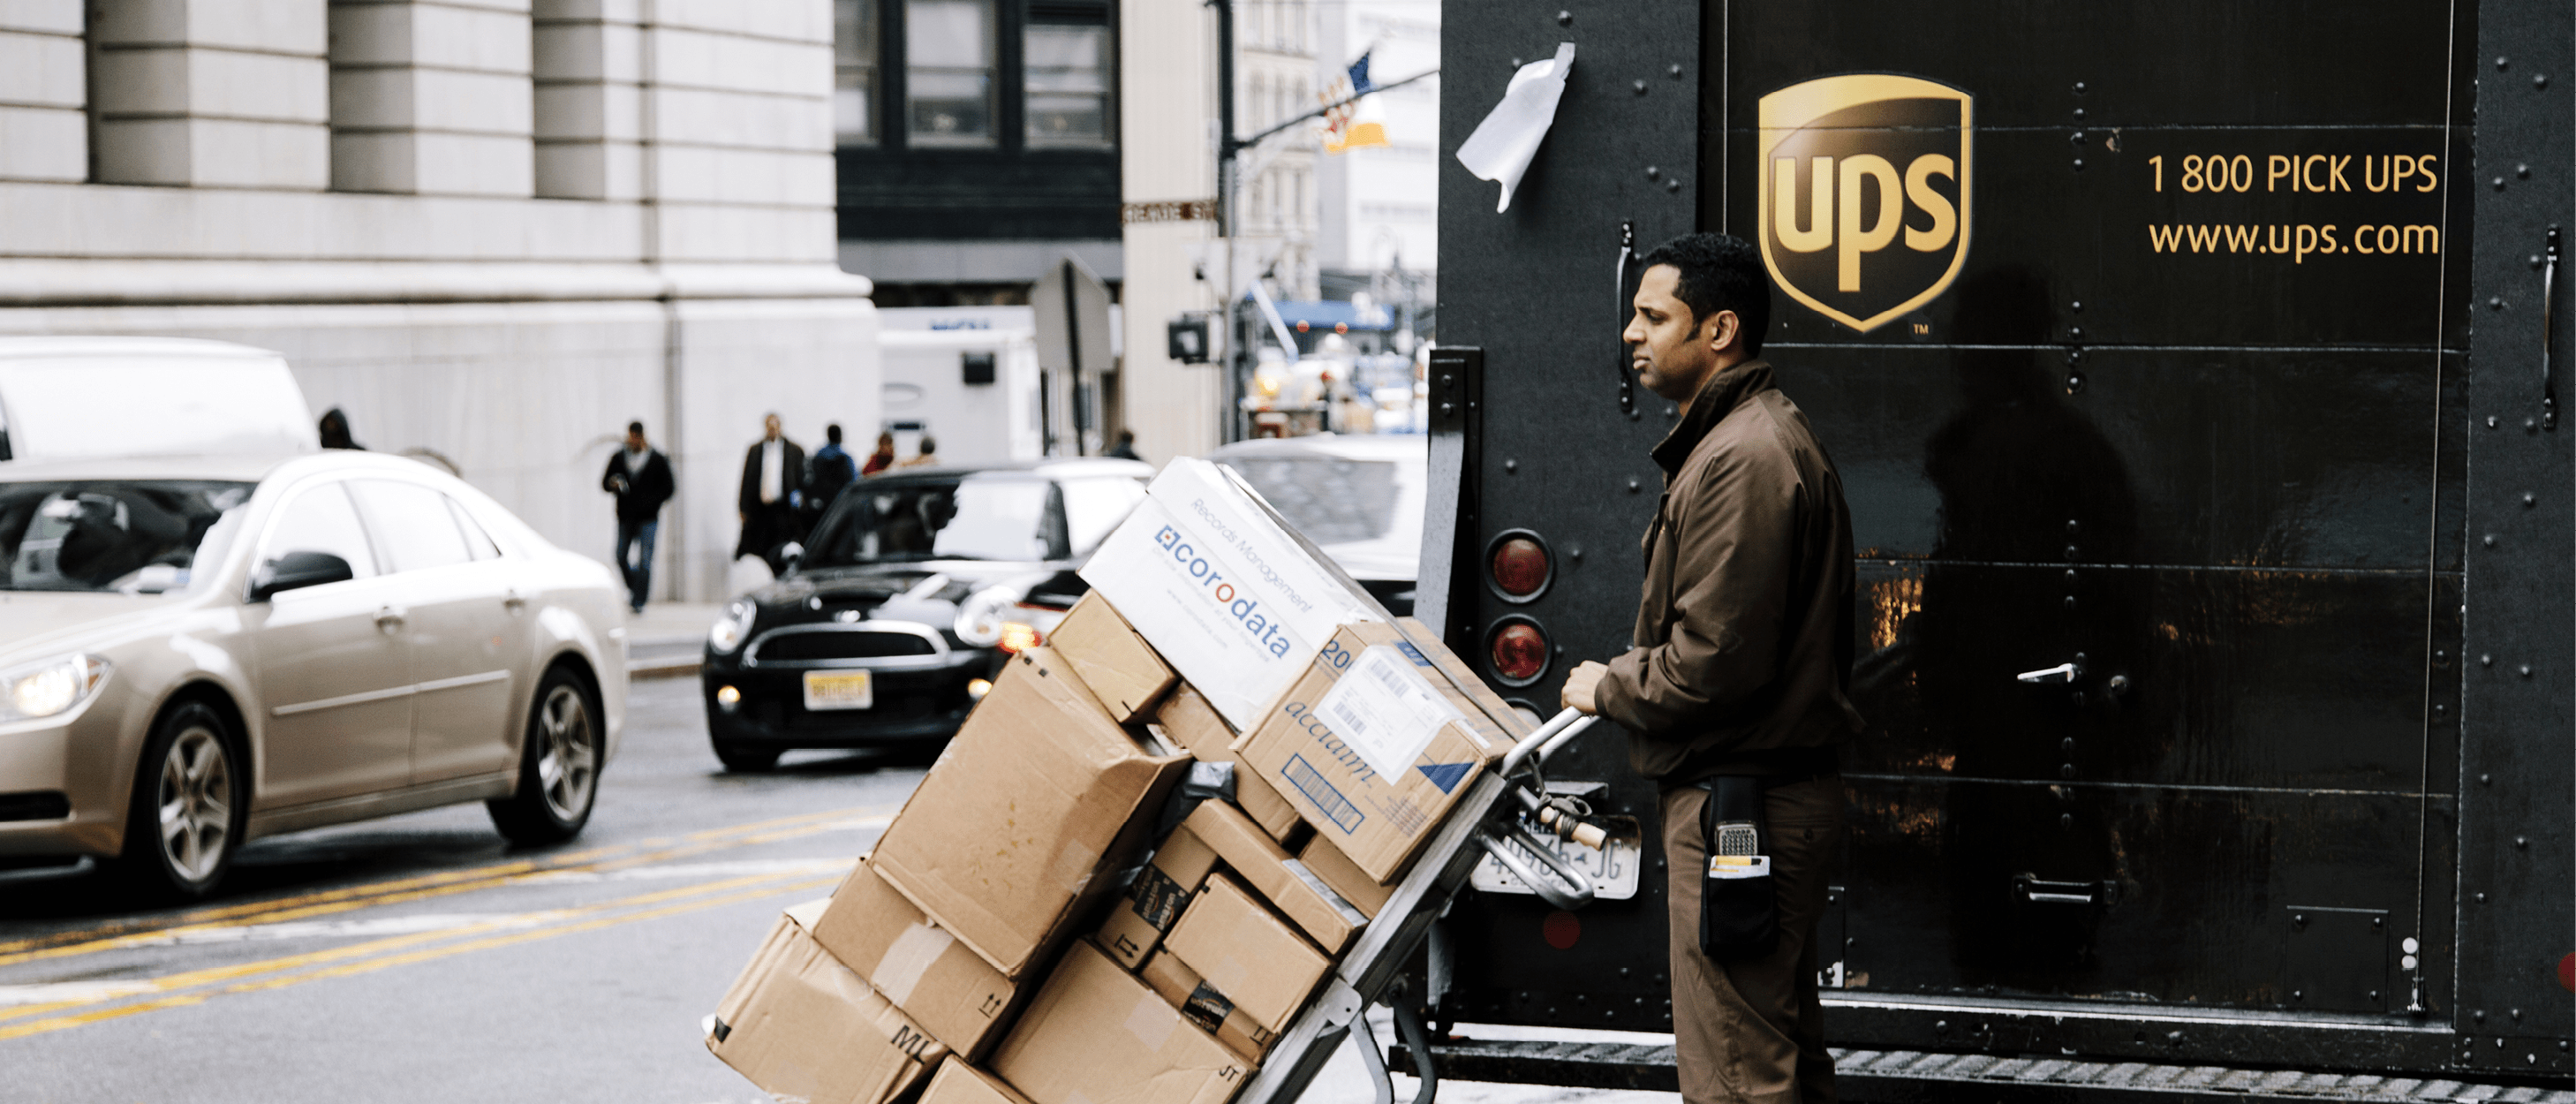 How To A UPS Delivery Driver Enrich Jobs